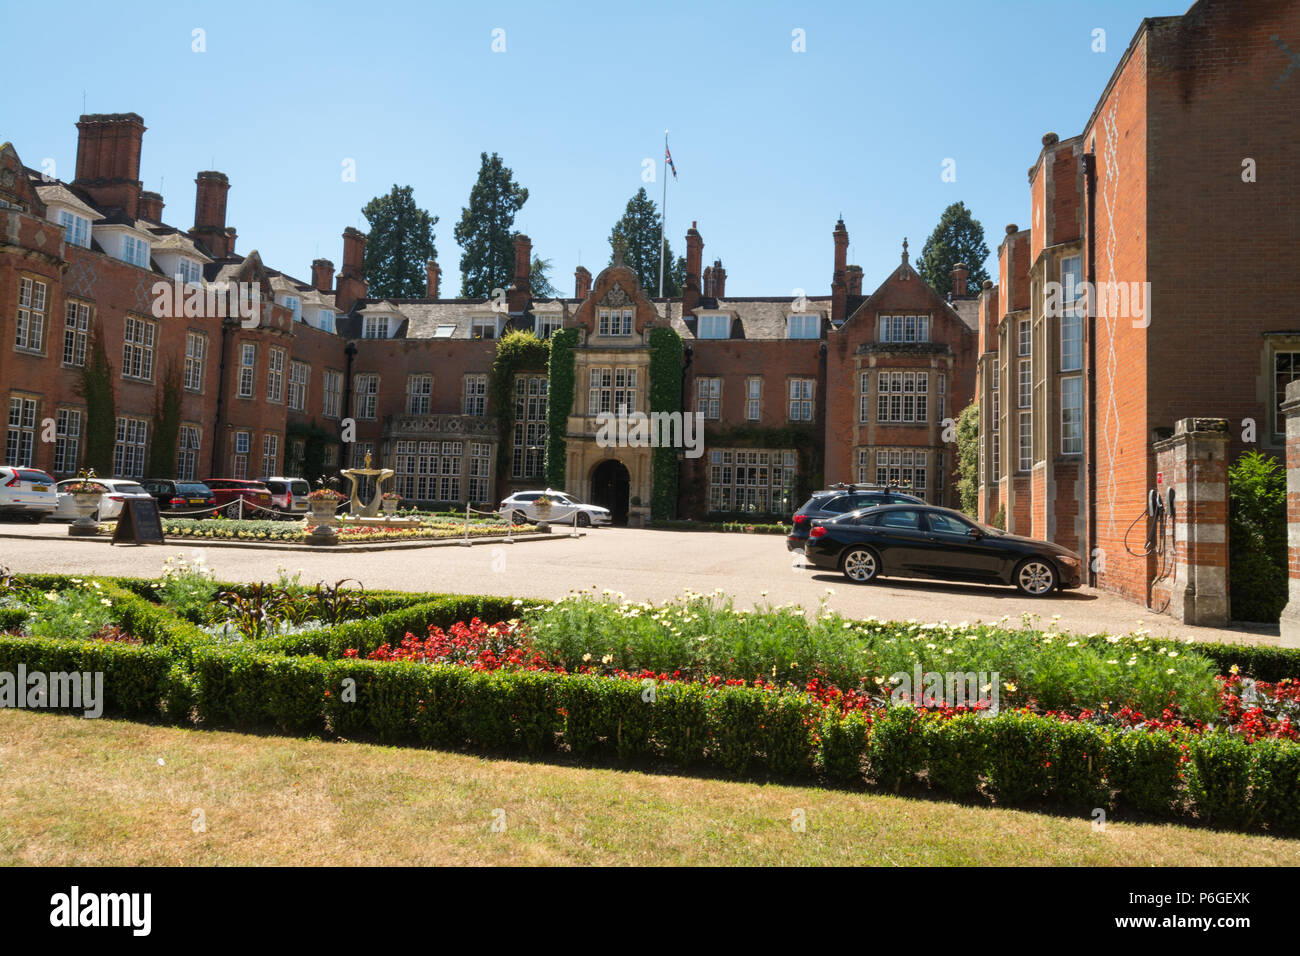 Tylney Hall, an upscale hotel in a Victorian Mansion set in parkland in Hampshire, UK Stock Photo